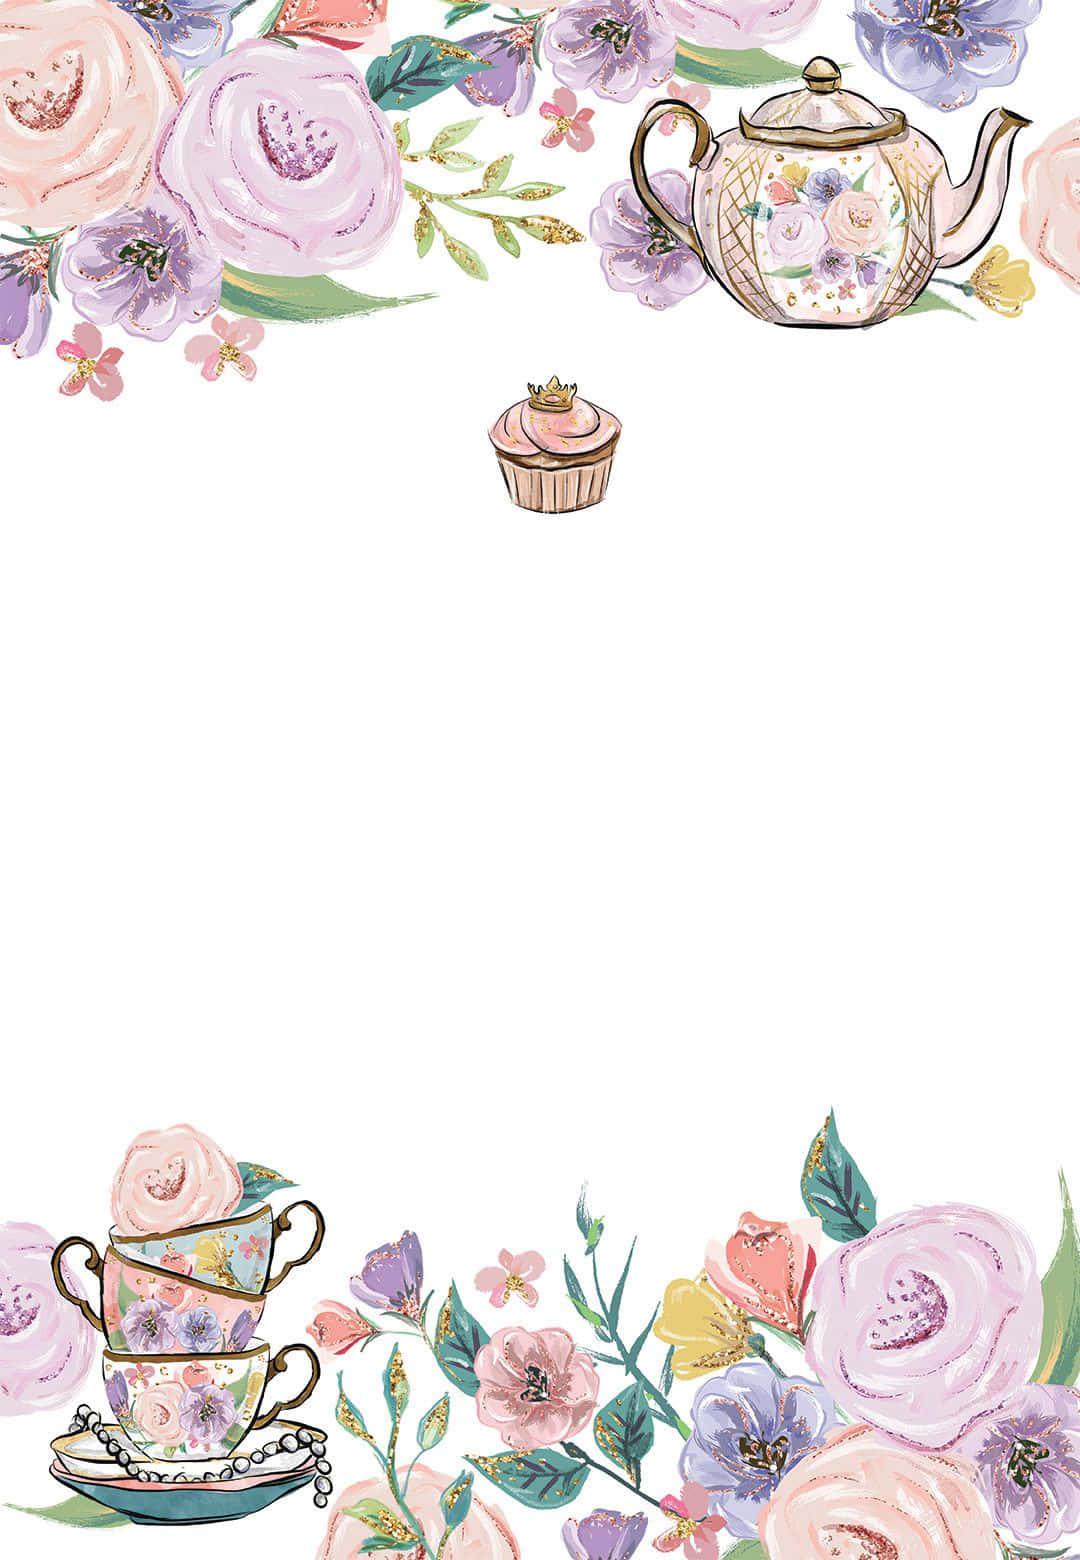 Caption: Aromatic Floral Tea in a Teacup Wallpaper